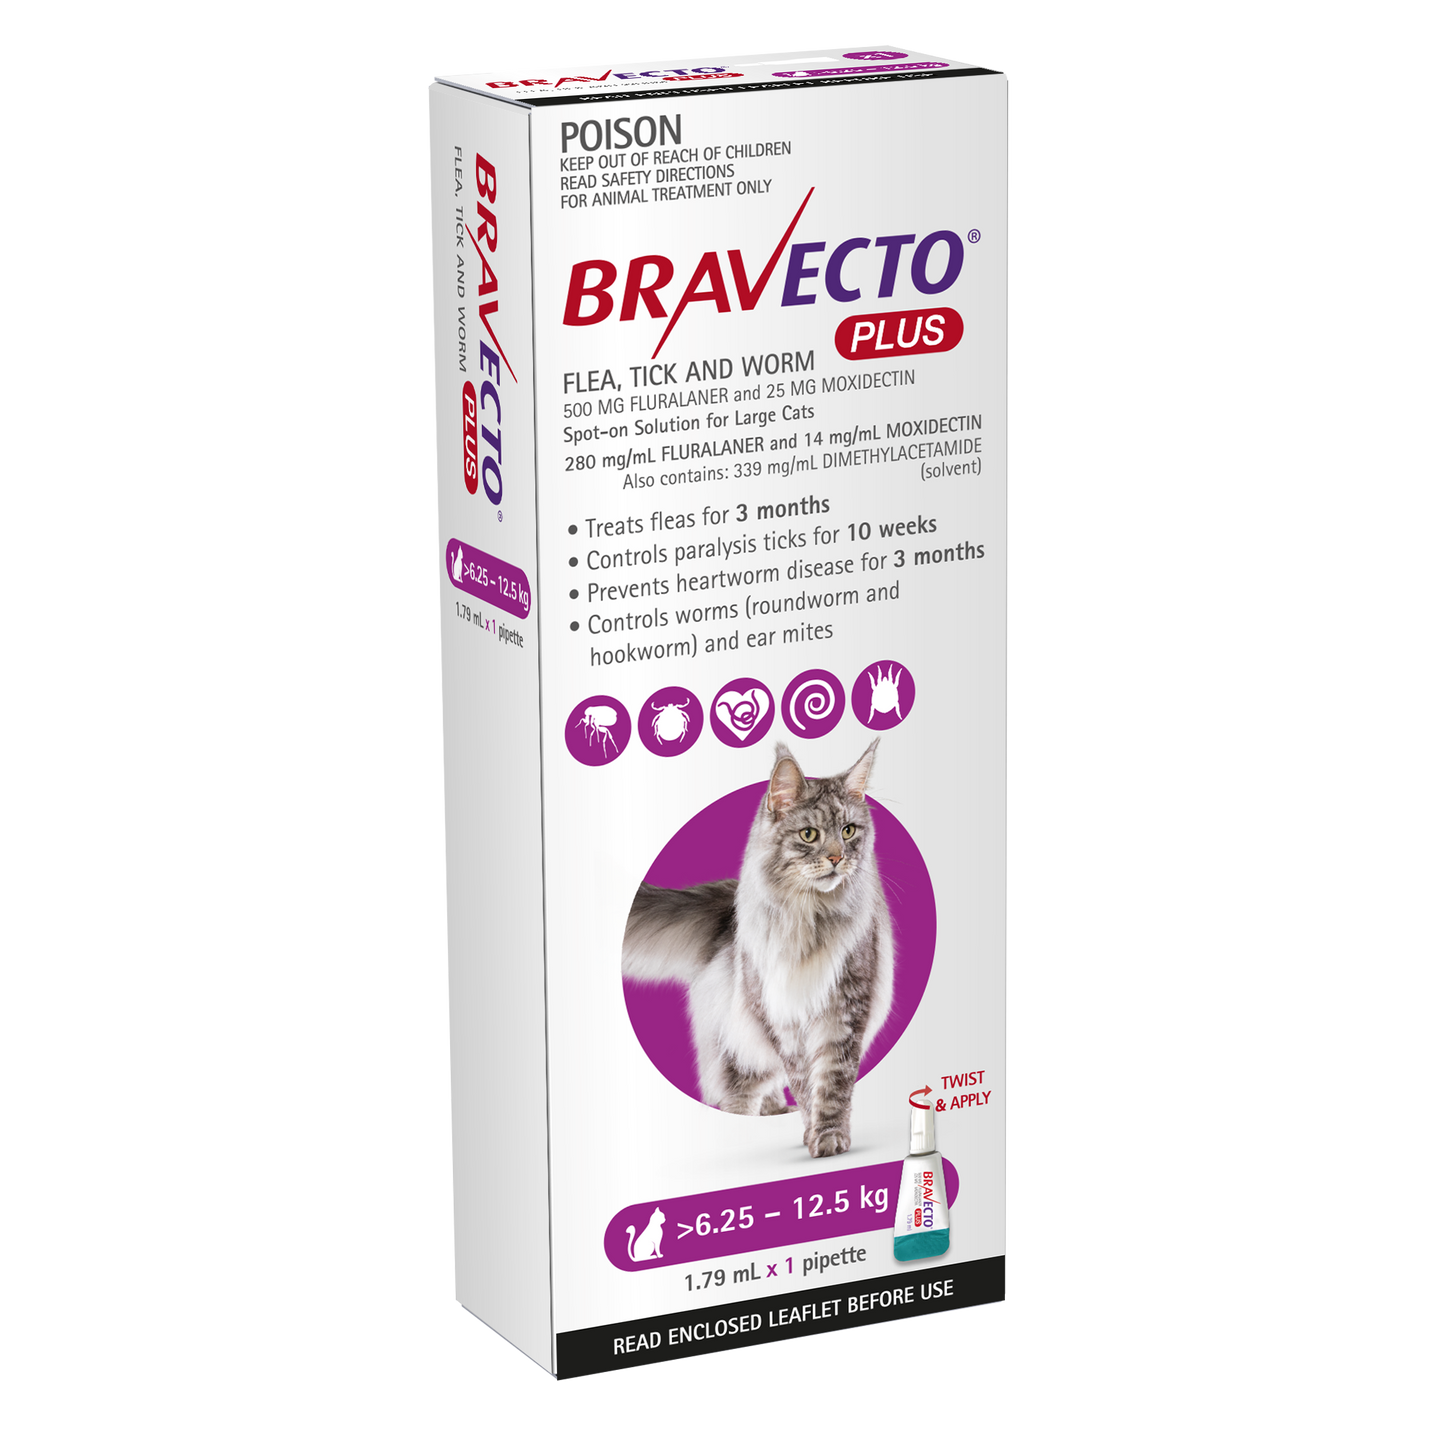 Bravecto Plus Spot-On for Cats, 13.8-27.5lbs (6.25-12.5kg)